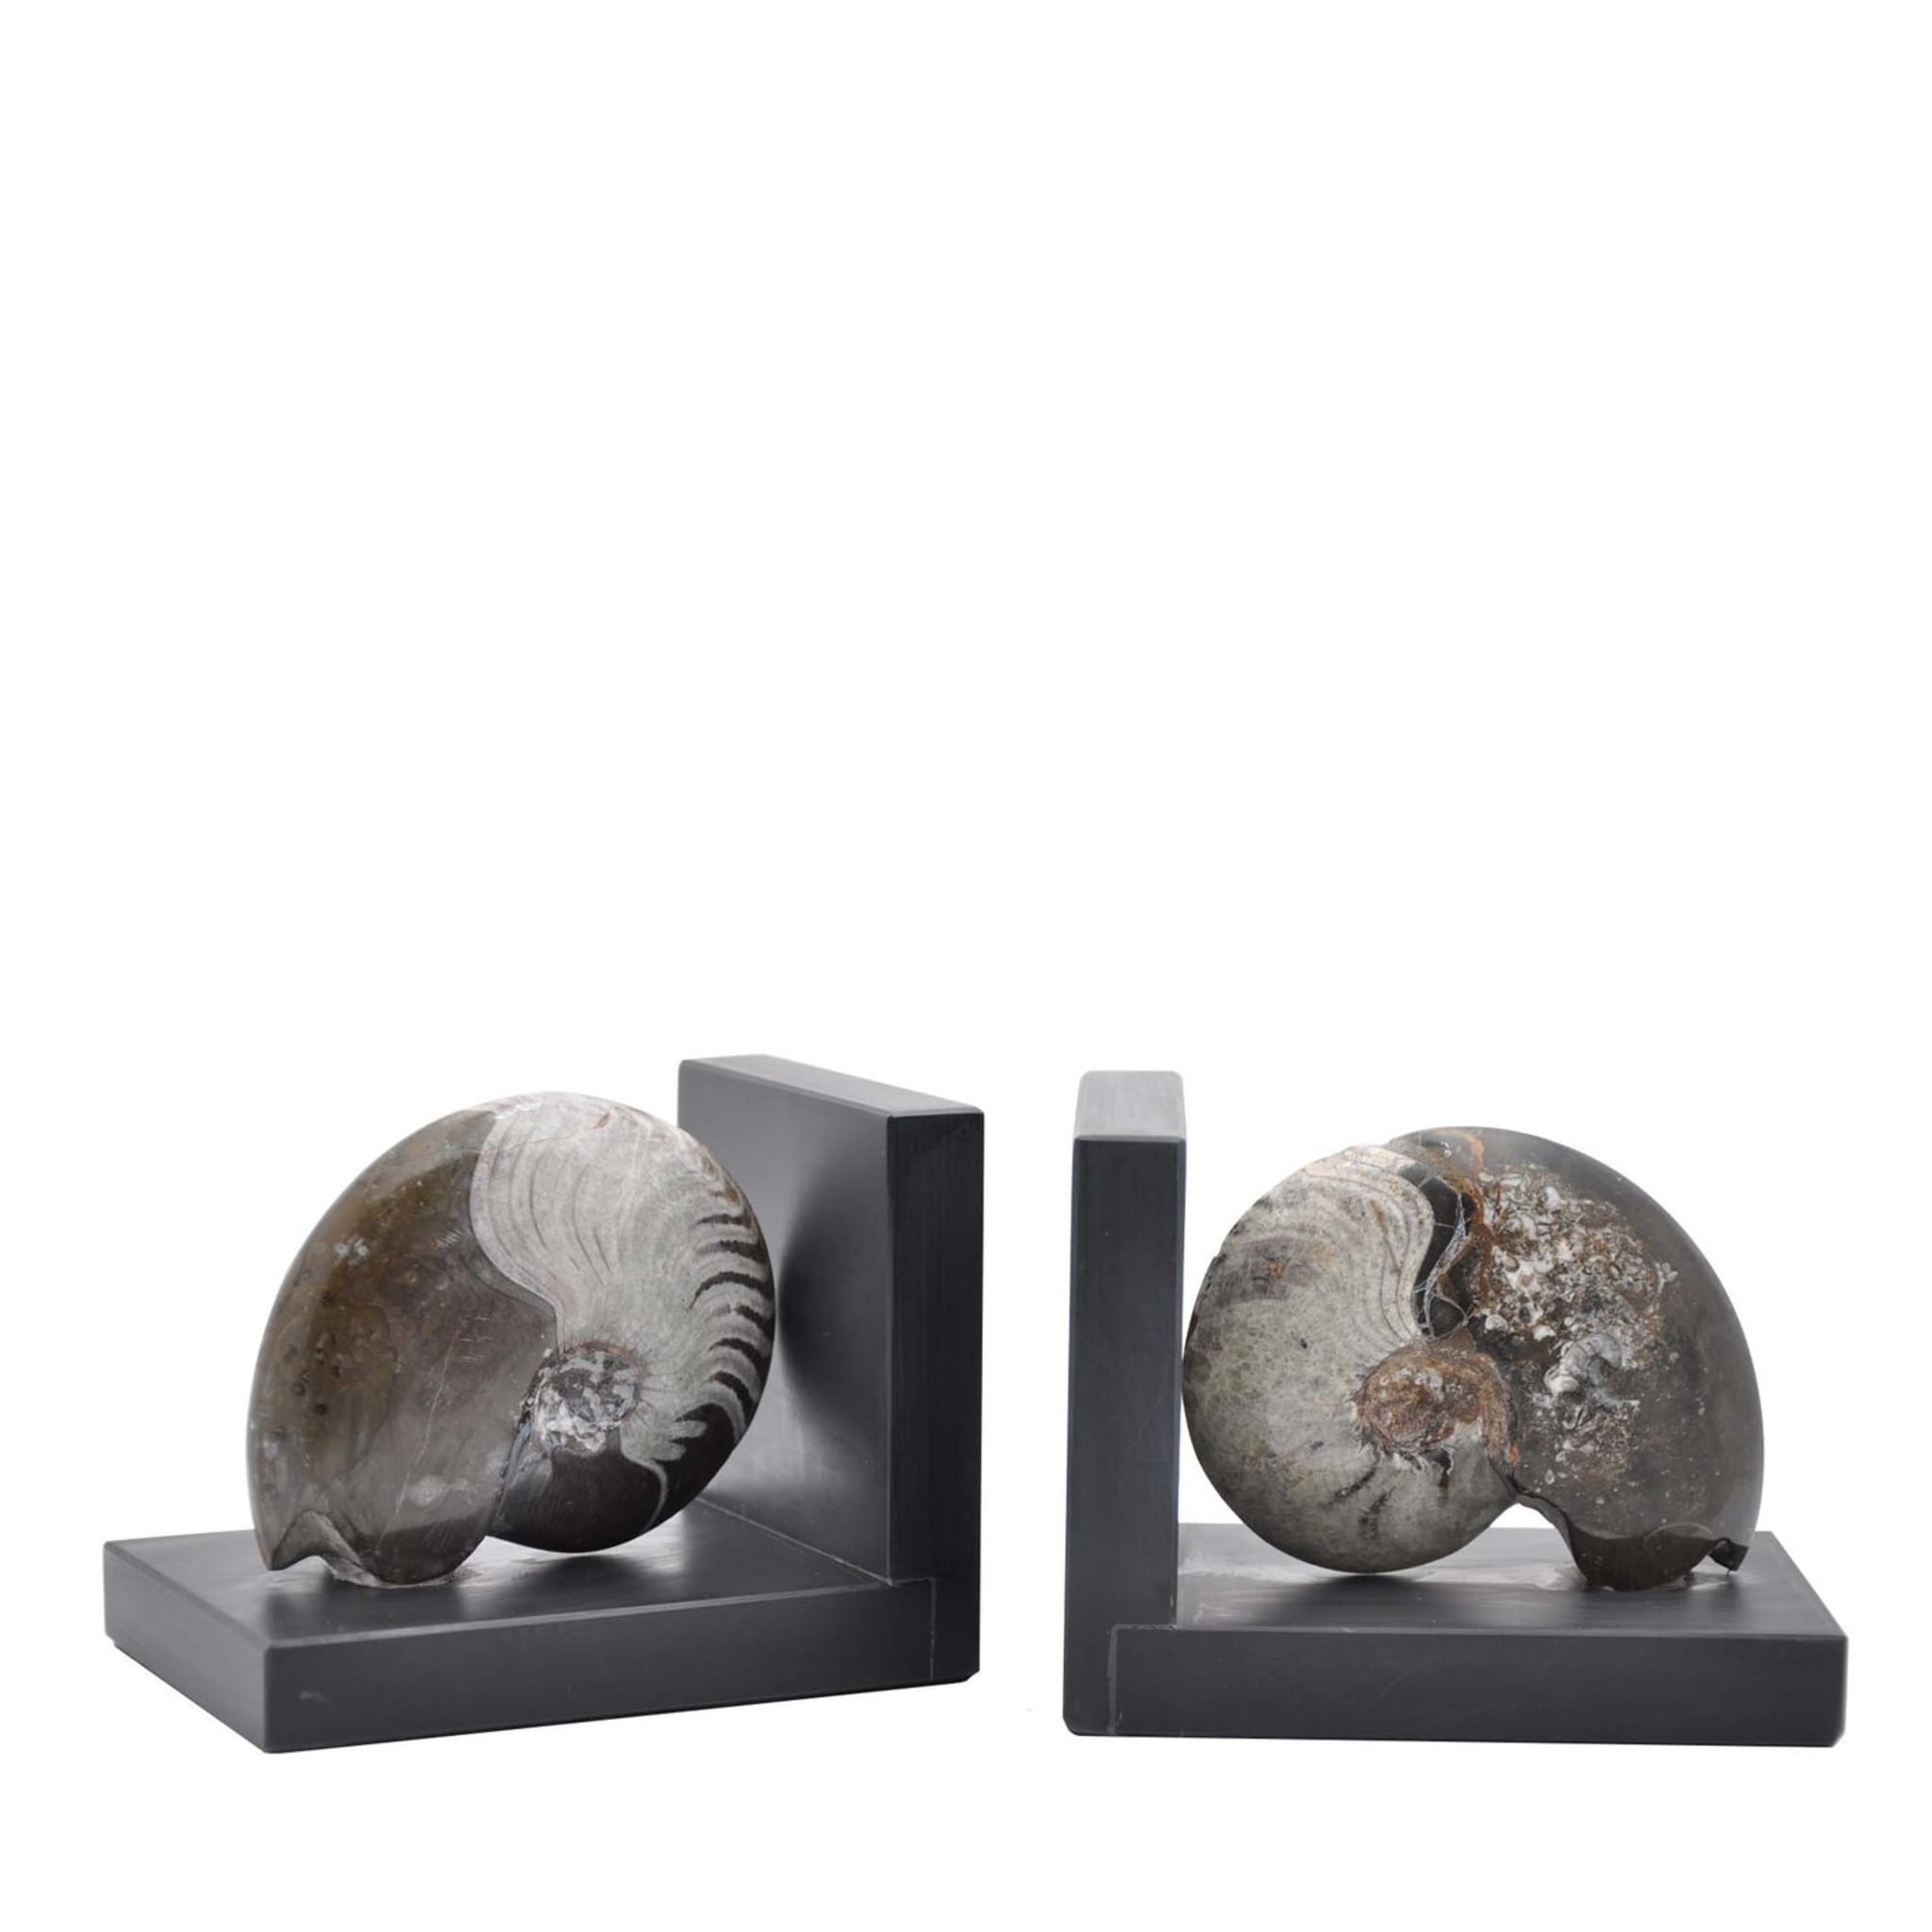 Fossiline Bookends sculpture #4 by Nino Basso - Main view